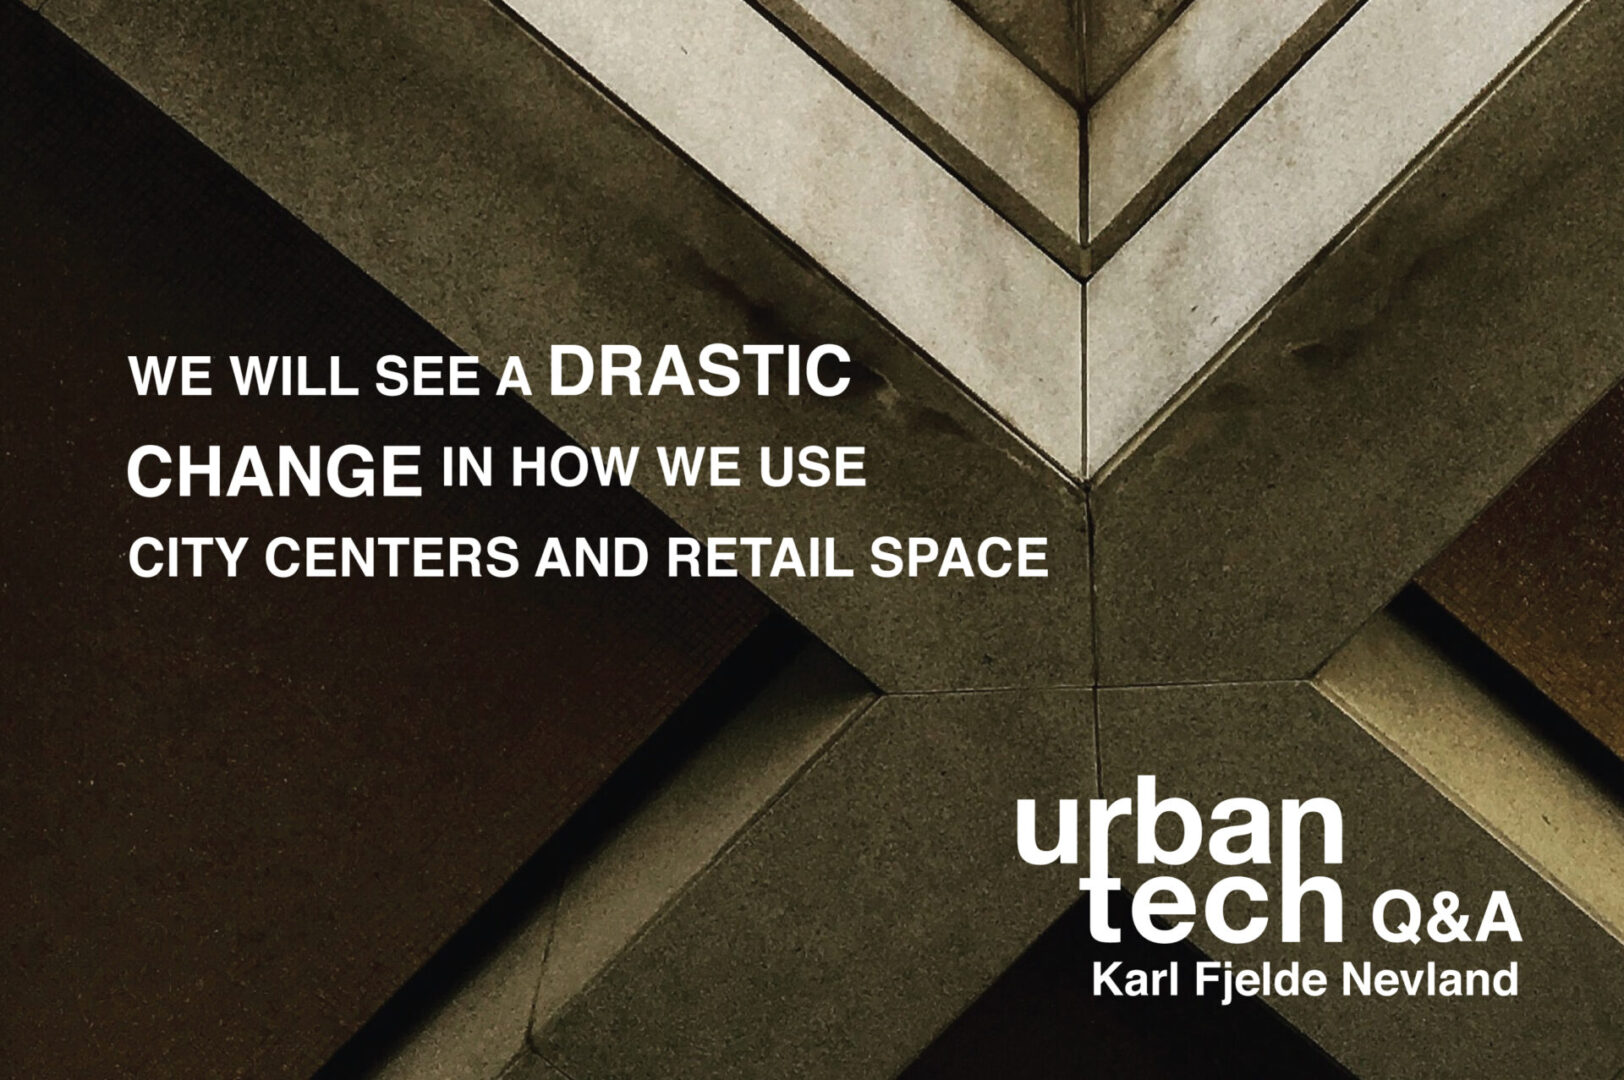 we will see a drastic change in how we use city centers and retail space - urbantech q&a with Karl Fjelde Nevland